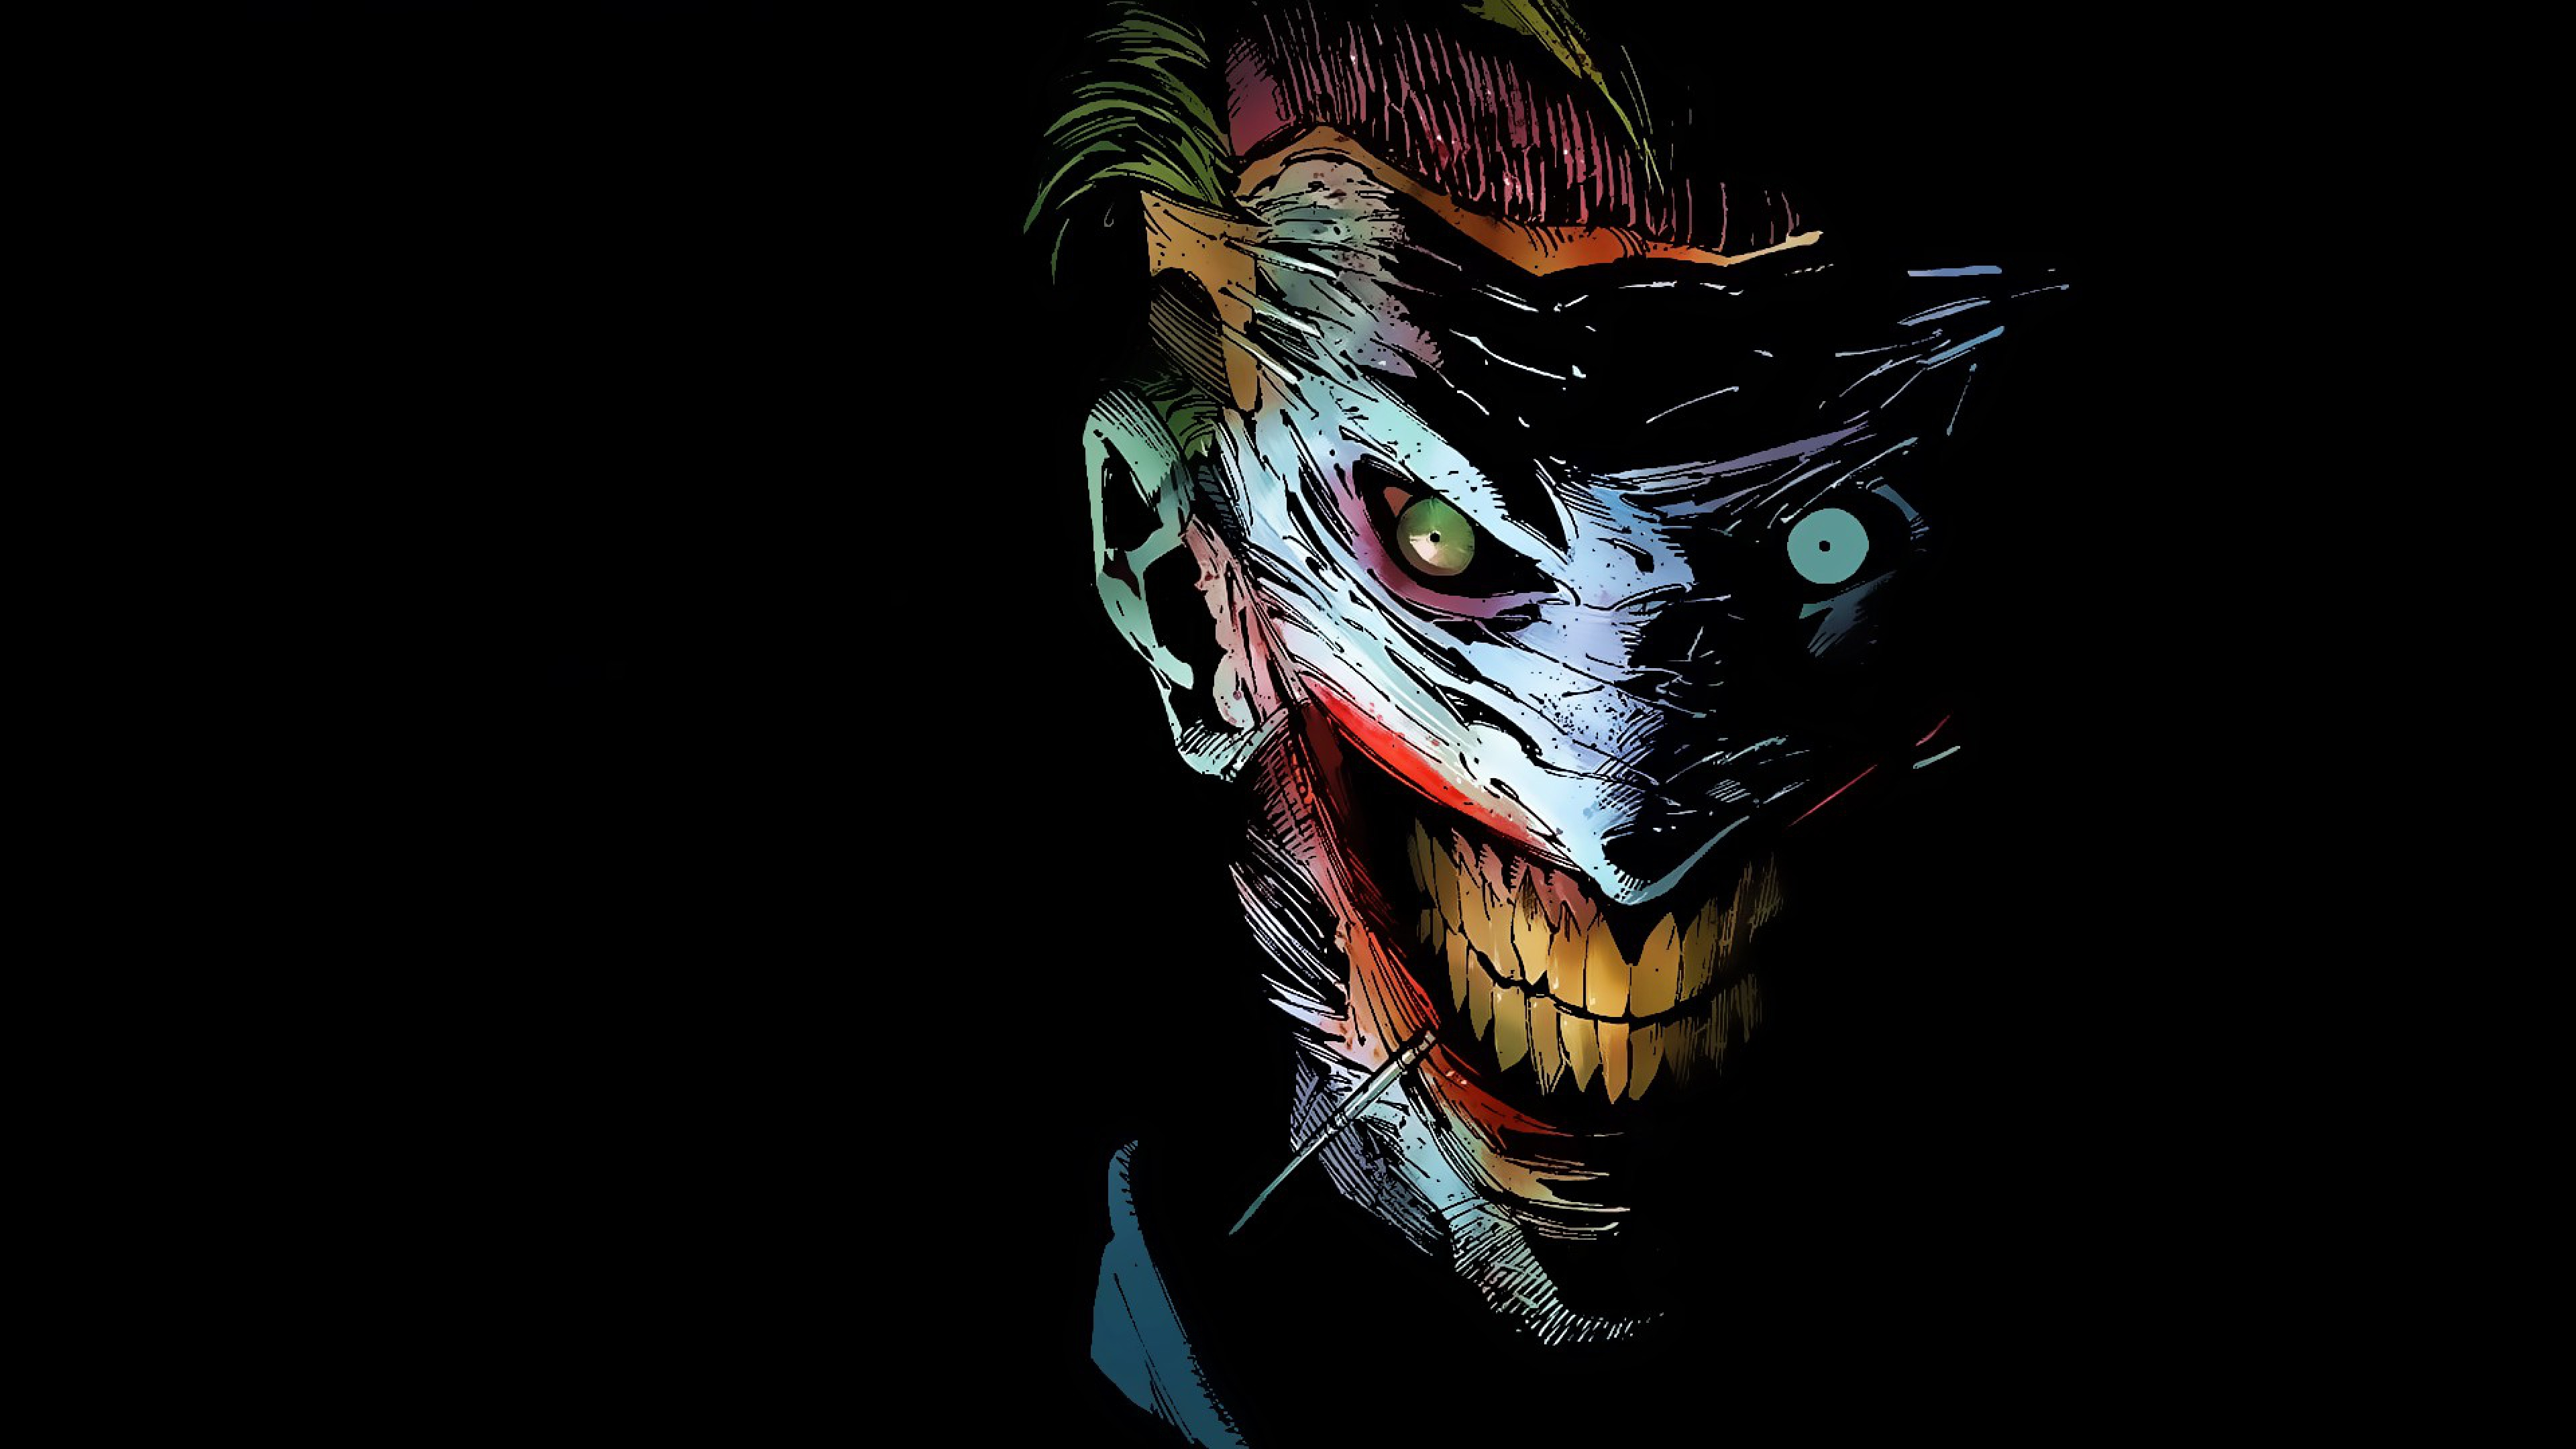 3840x2160 270+ Joker HD Wallpapers and Backgrounds